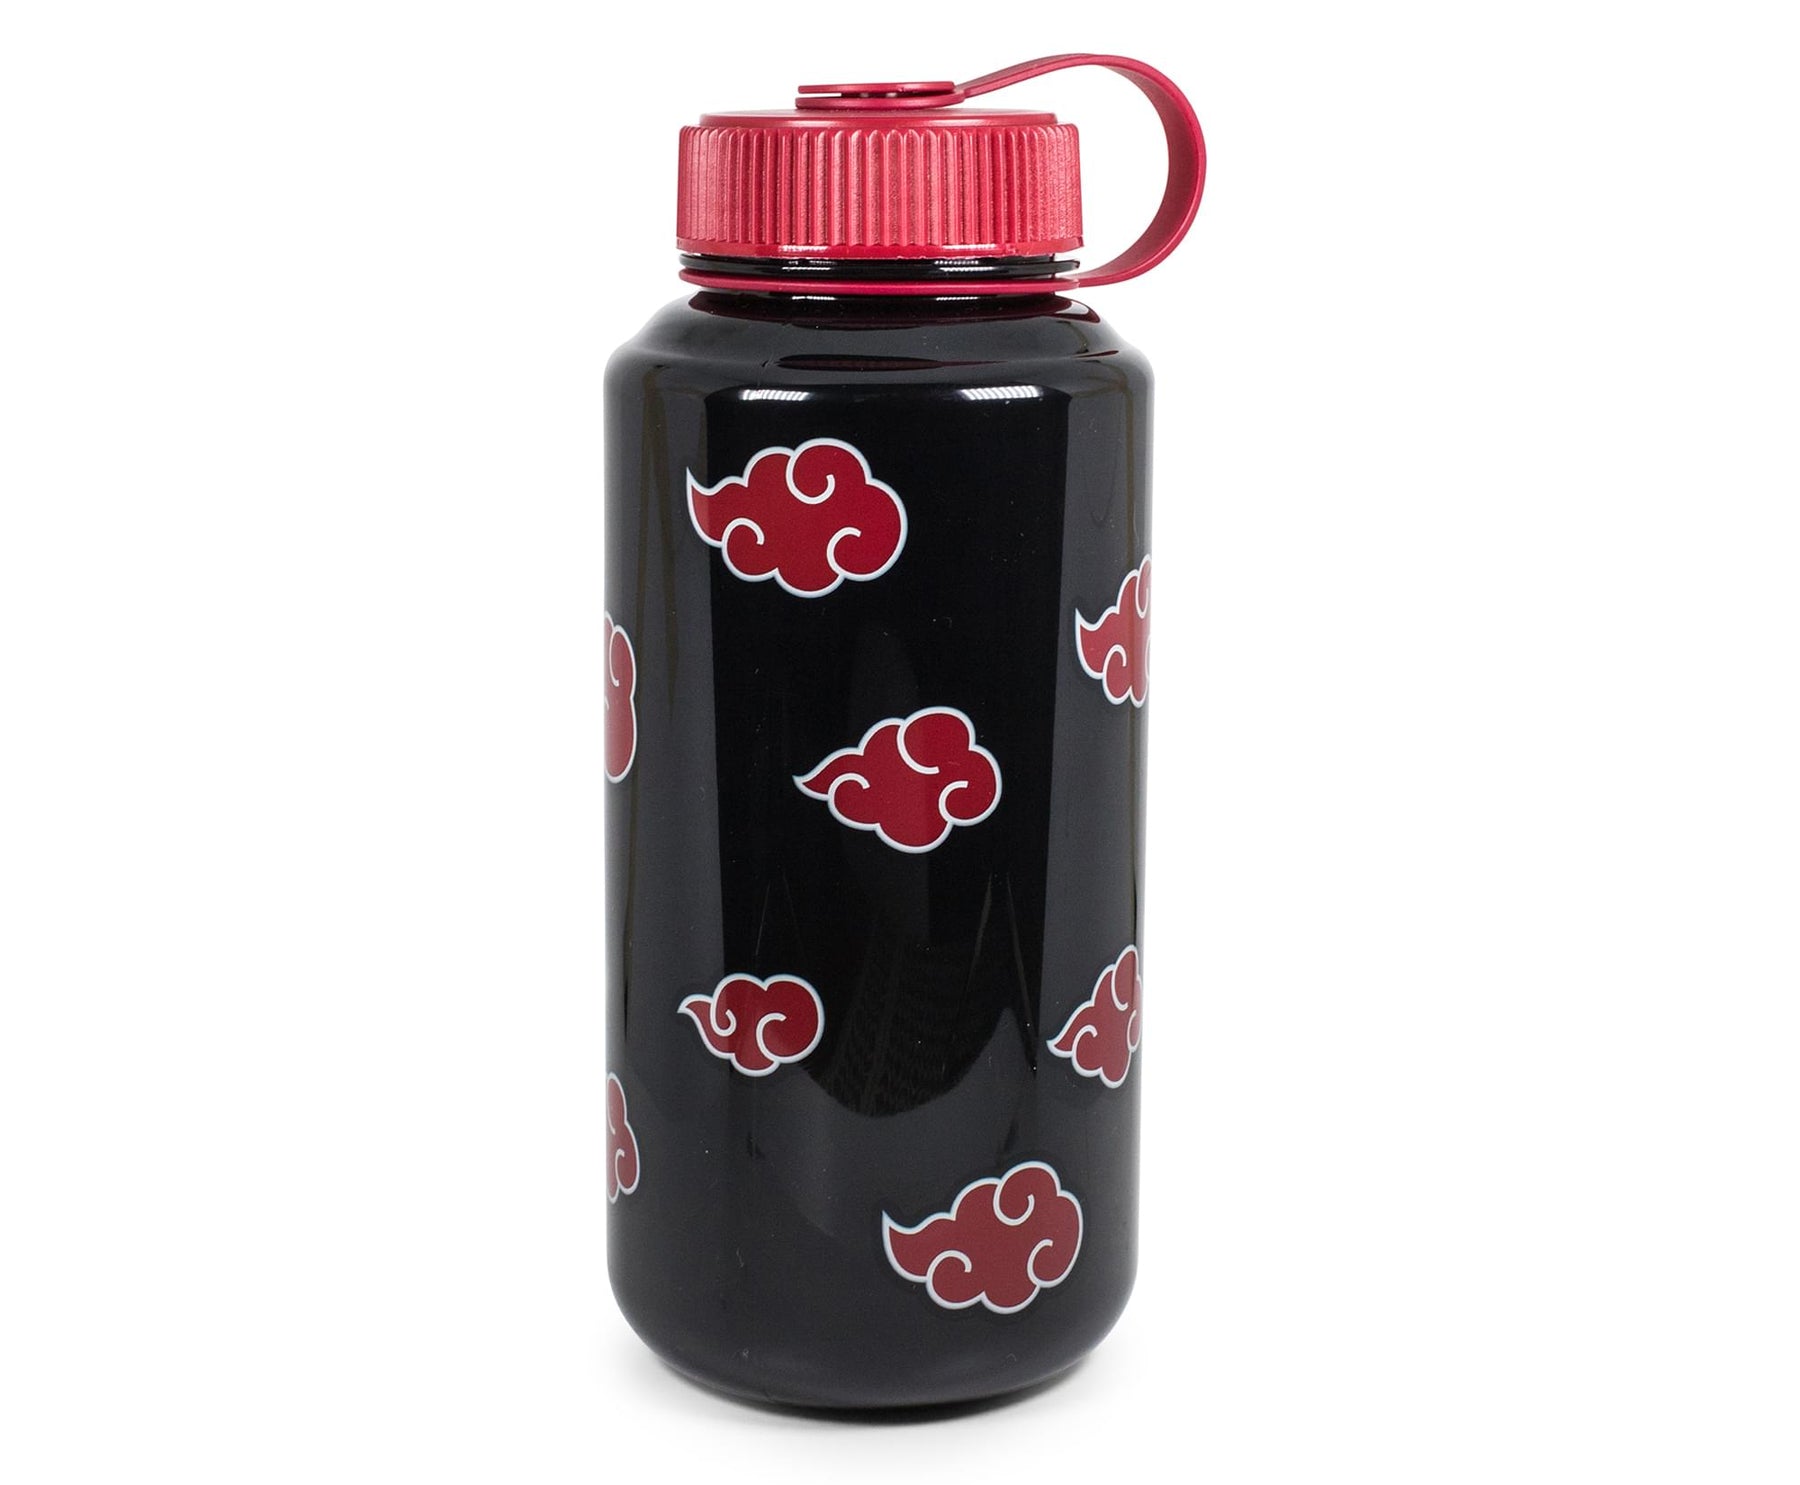 Naruto Shippuden Akatsuki Red Clouds Plastic Water Bottle | Holds 32 Ounces